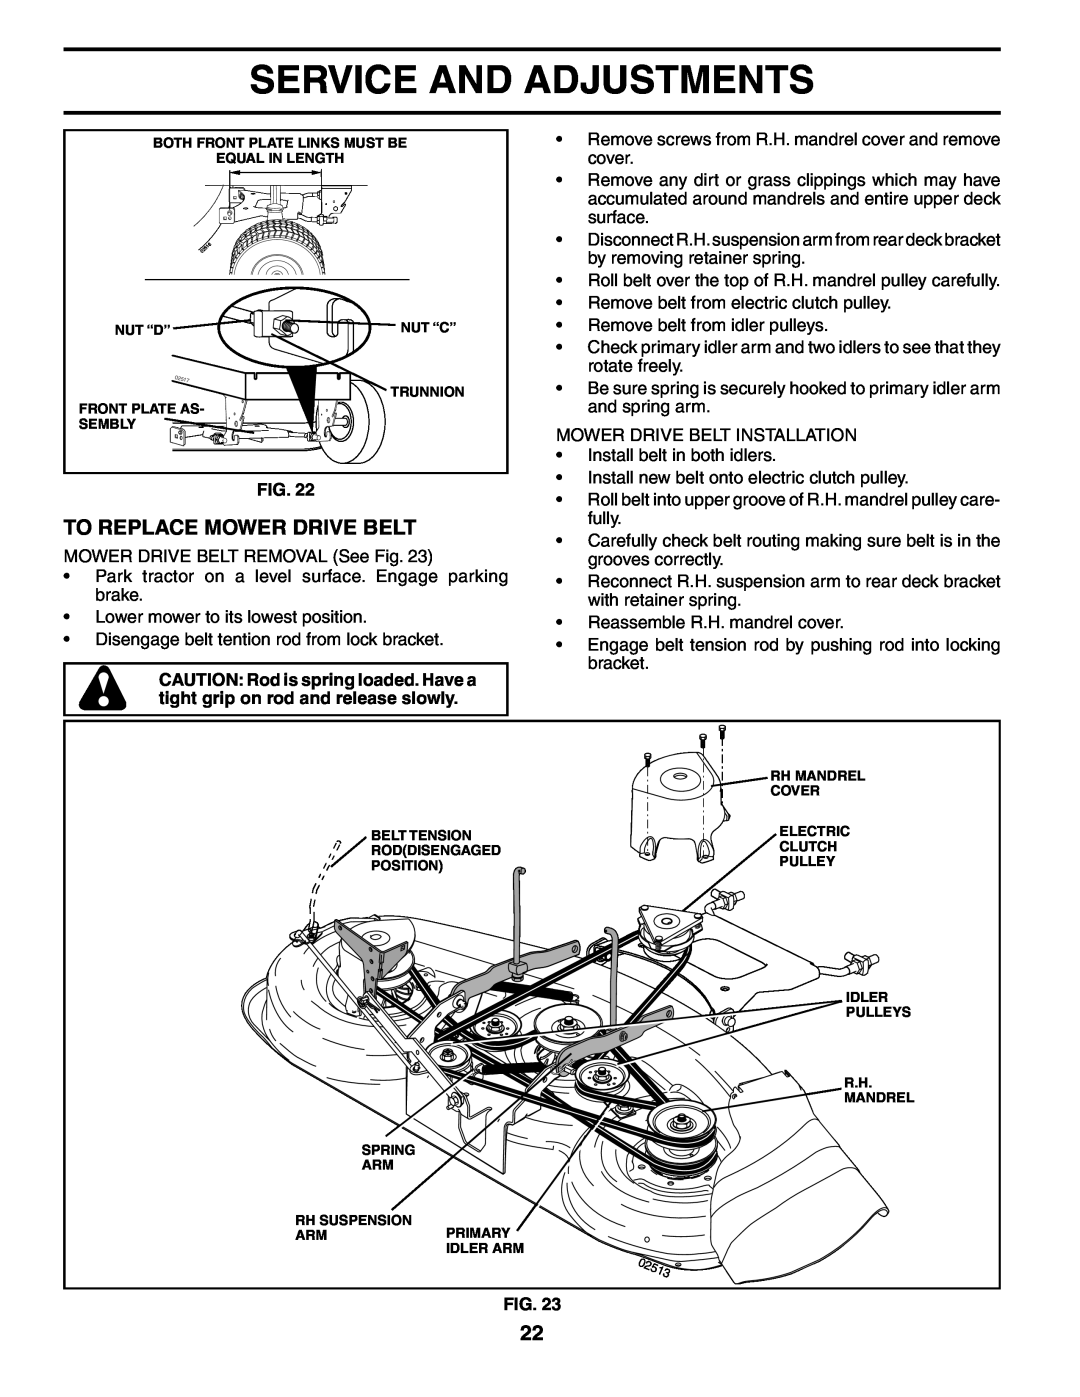 Poulan DB27H48YT manual To Replace Mower Drive Belt, Service And Adjustments, Fig 